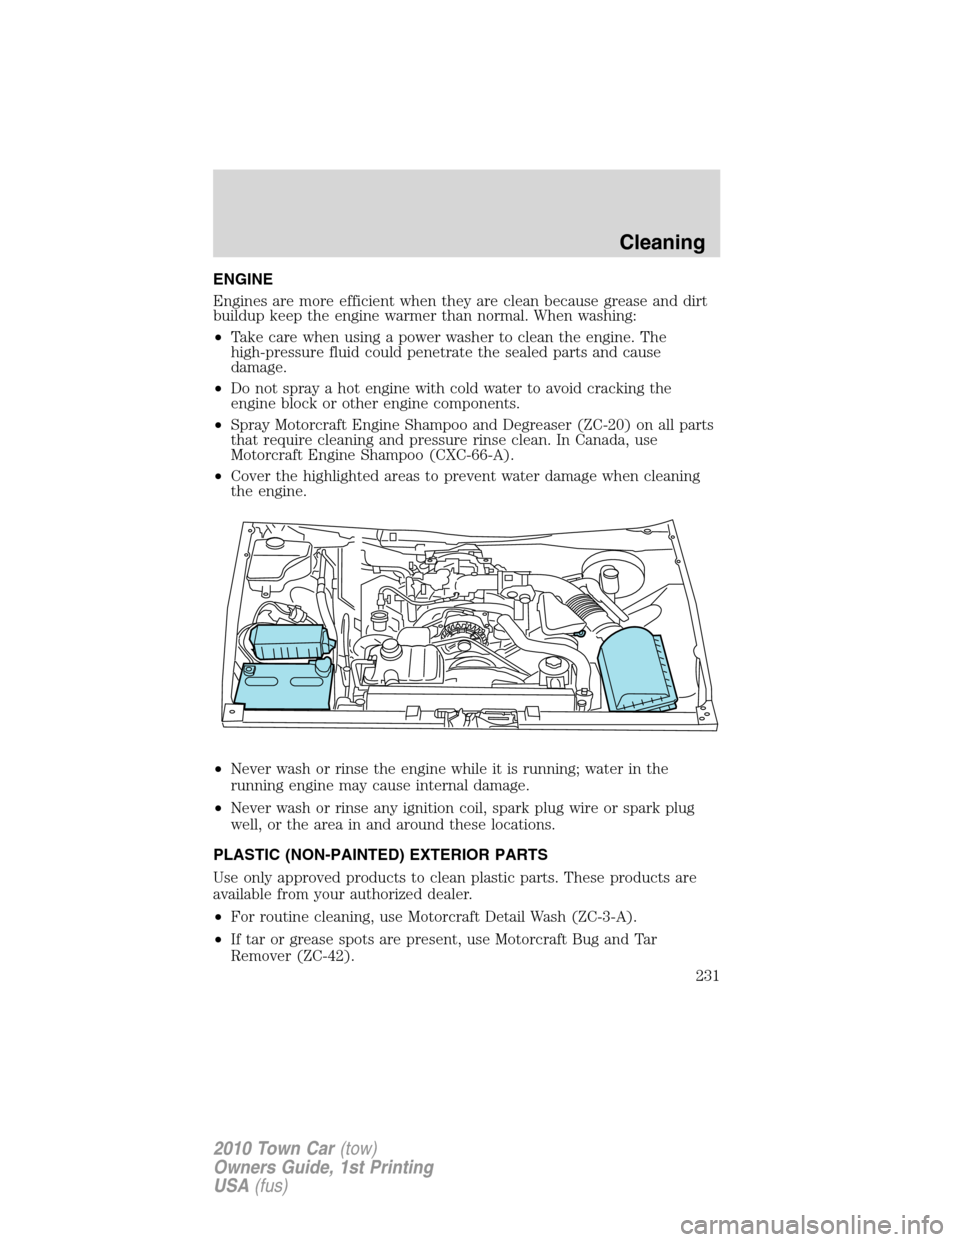 LINCOLN TOWN CAR 2010  Owners Manual ENGINE
Engines are more efficient when they are clean because grease and dirt
buildup keep the engine warmer than normal. When washing:
•Take care when using a power washer to clean the engine. The
